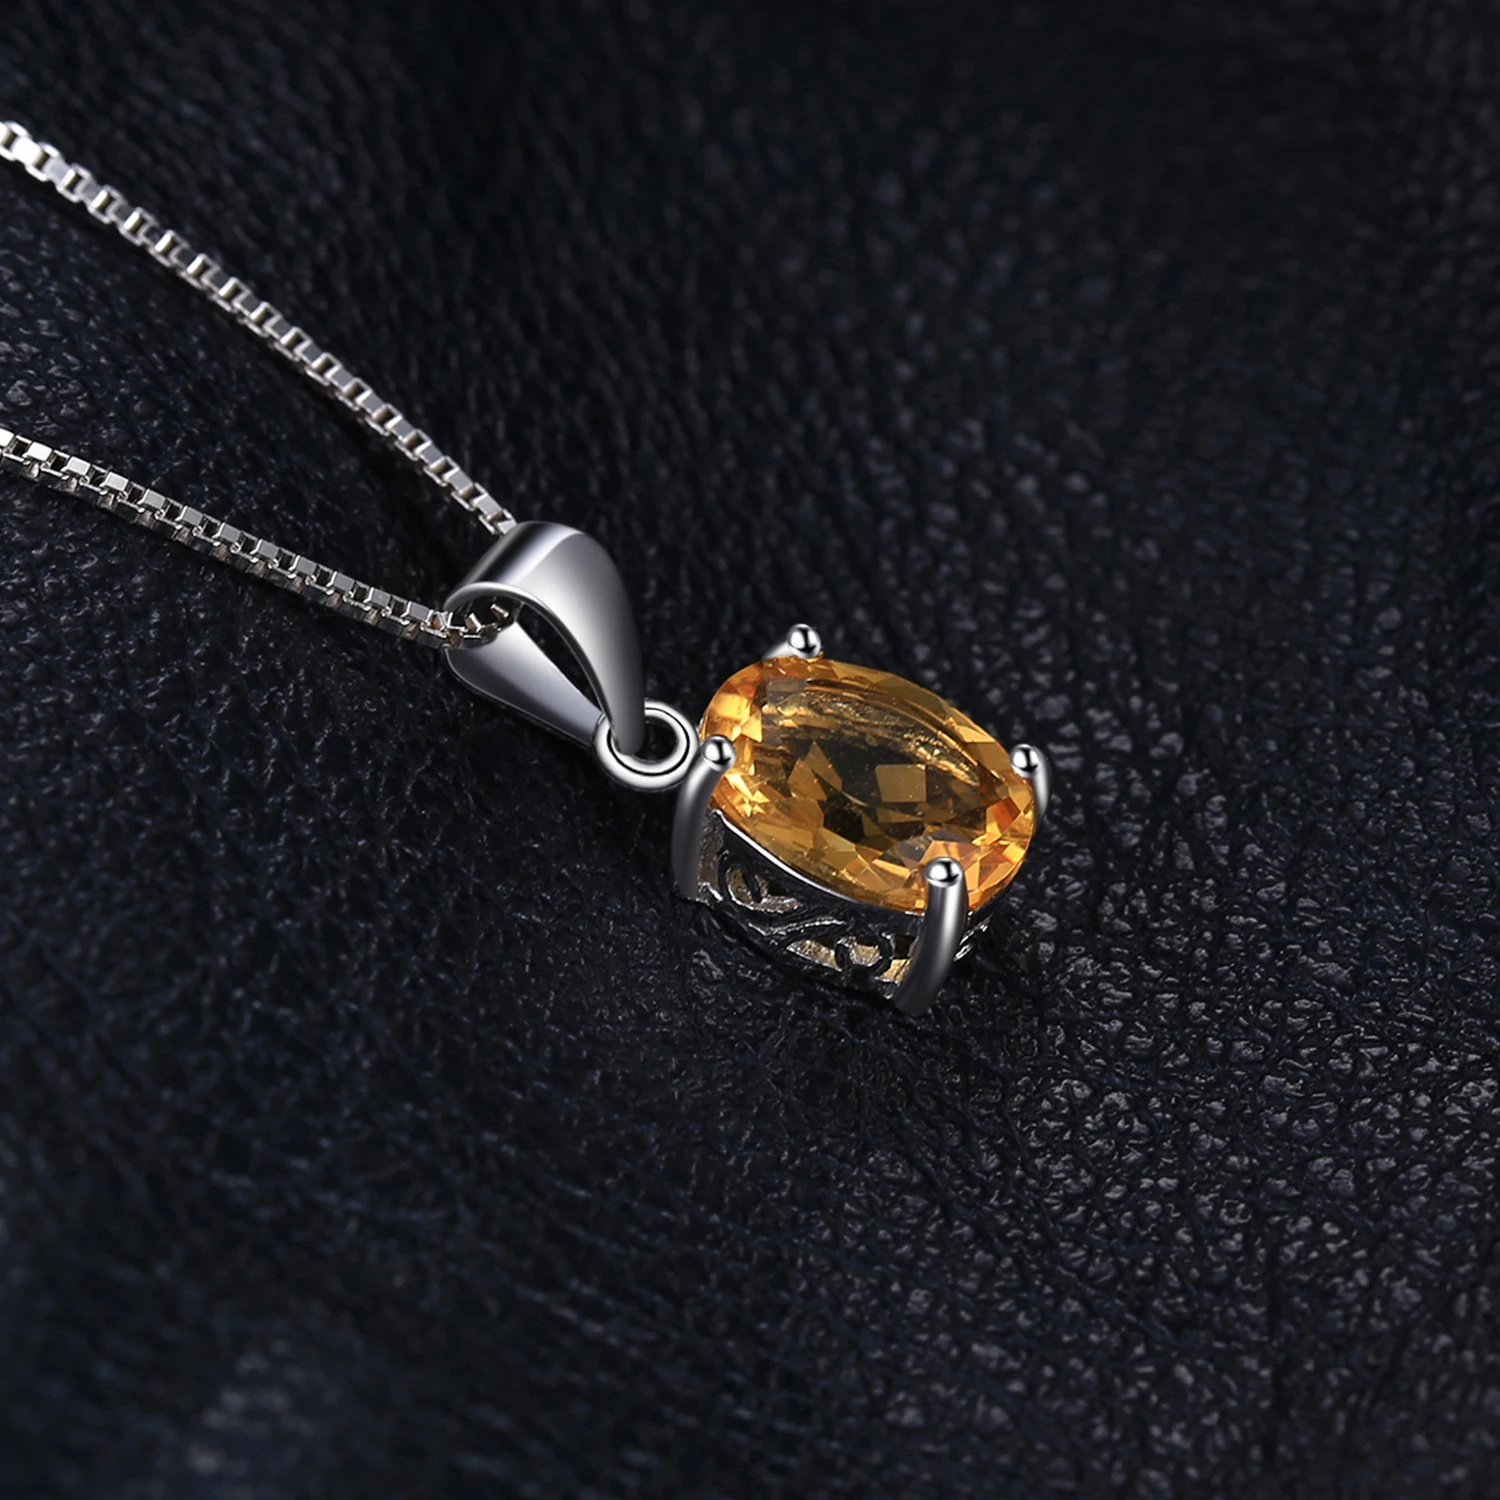 JewelryPalace Oval Yellow Genuine Natural Citrine 925 Sterling Silver Pendant Necklace Gemstone Necklace for Women No Chain